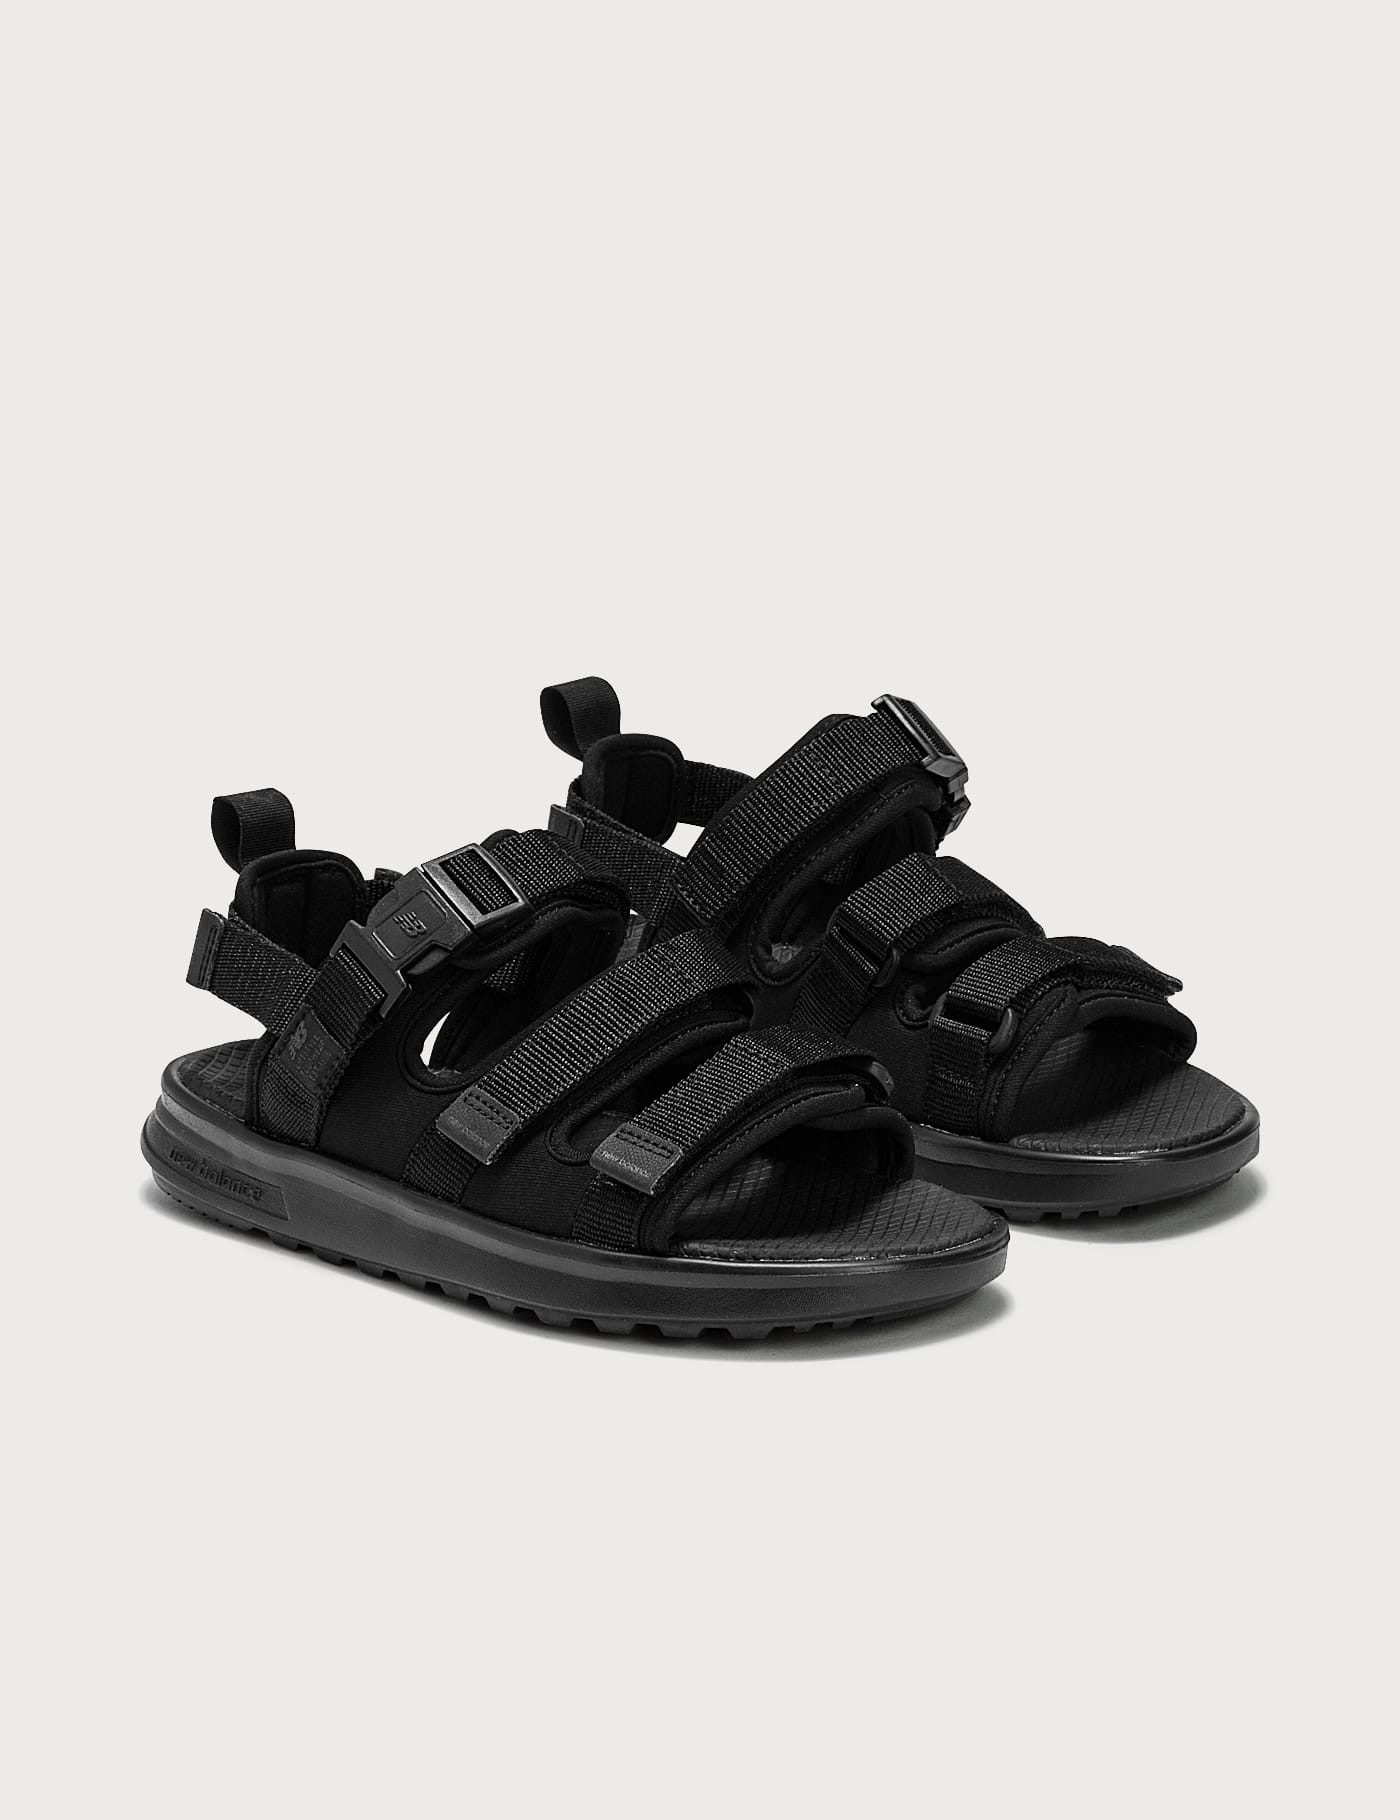 sandals by new balance